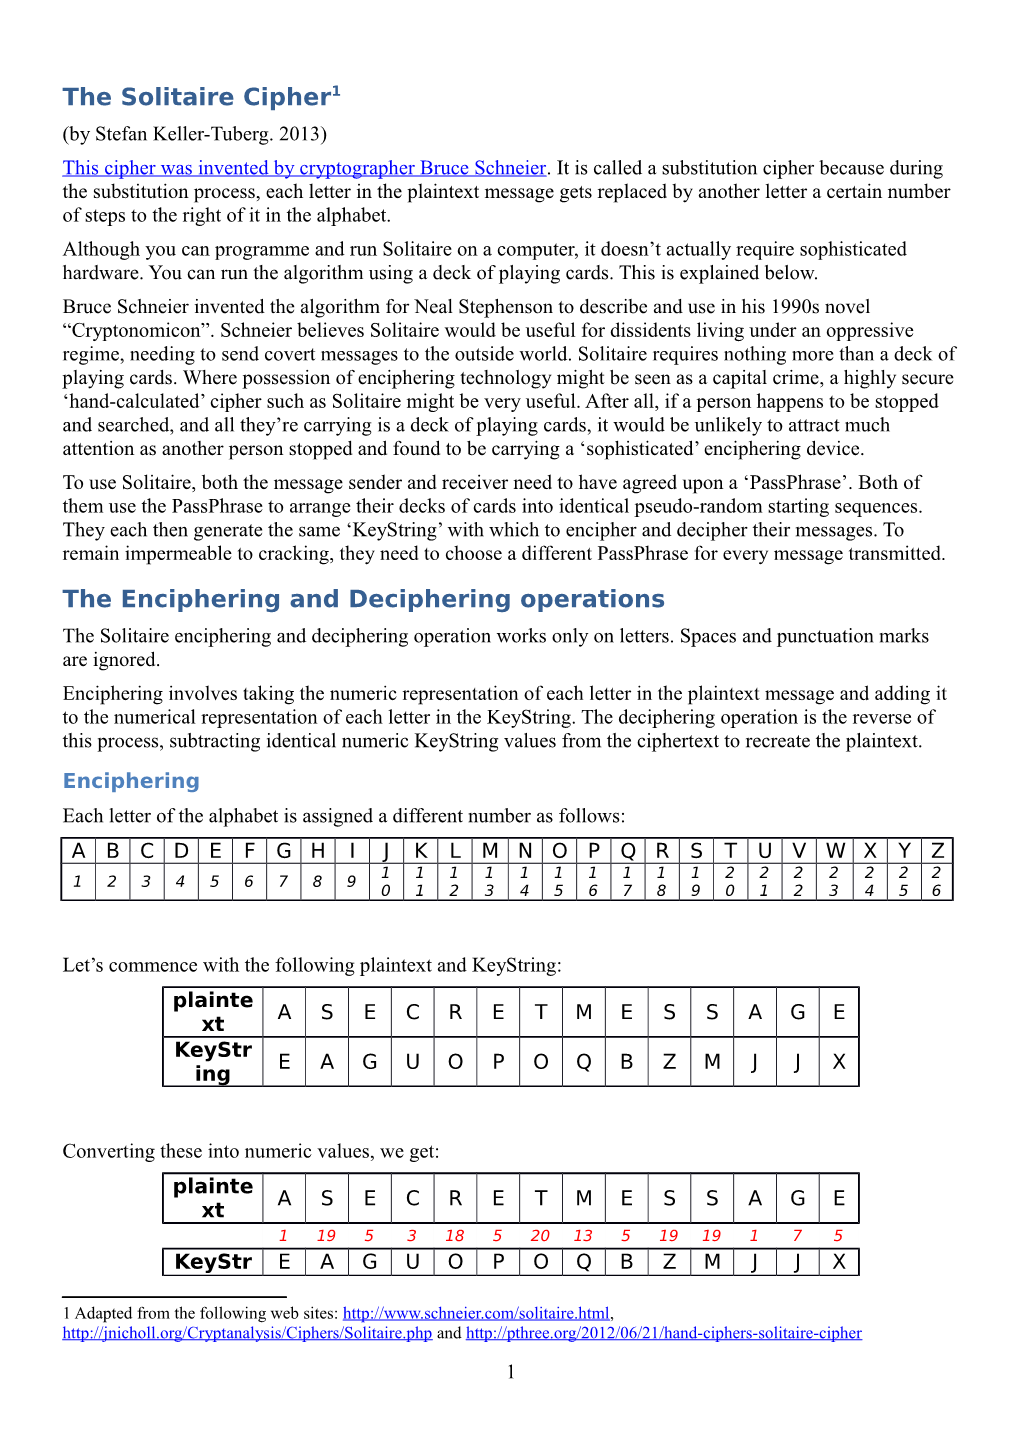 The Solitaire Cipher1 the Enciphering and Deciphering Operations